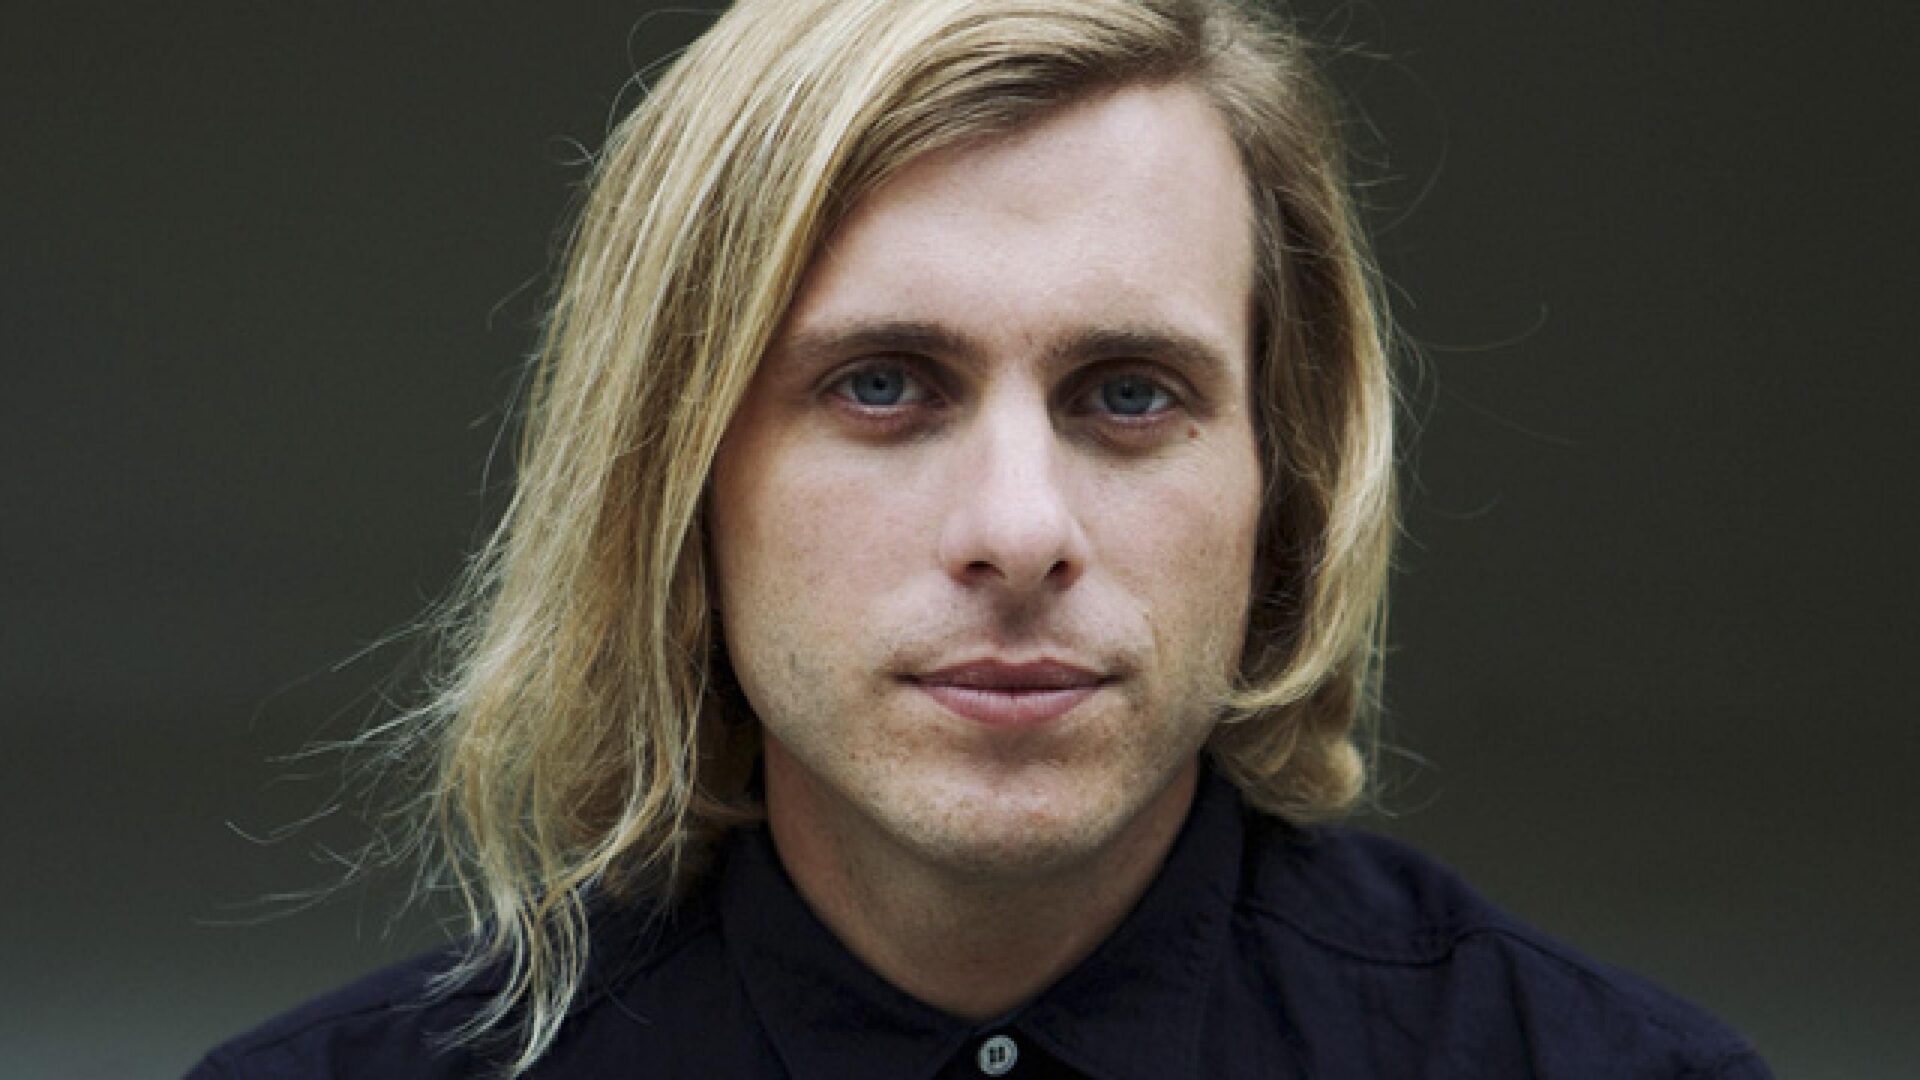 AWOLNATION release “The Best” + announce tour w/ Andrew McMahon